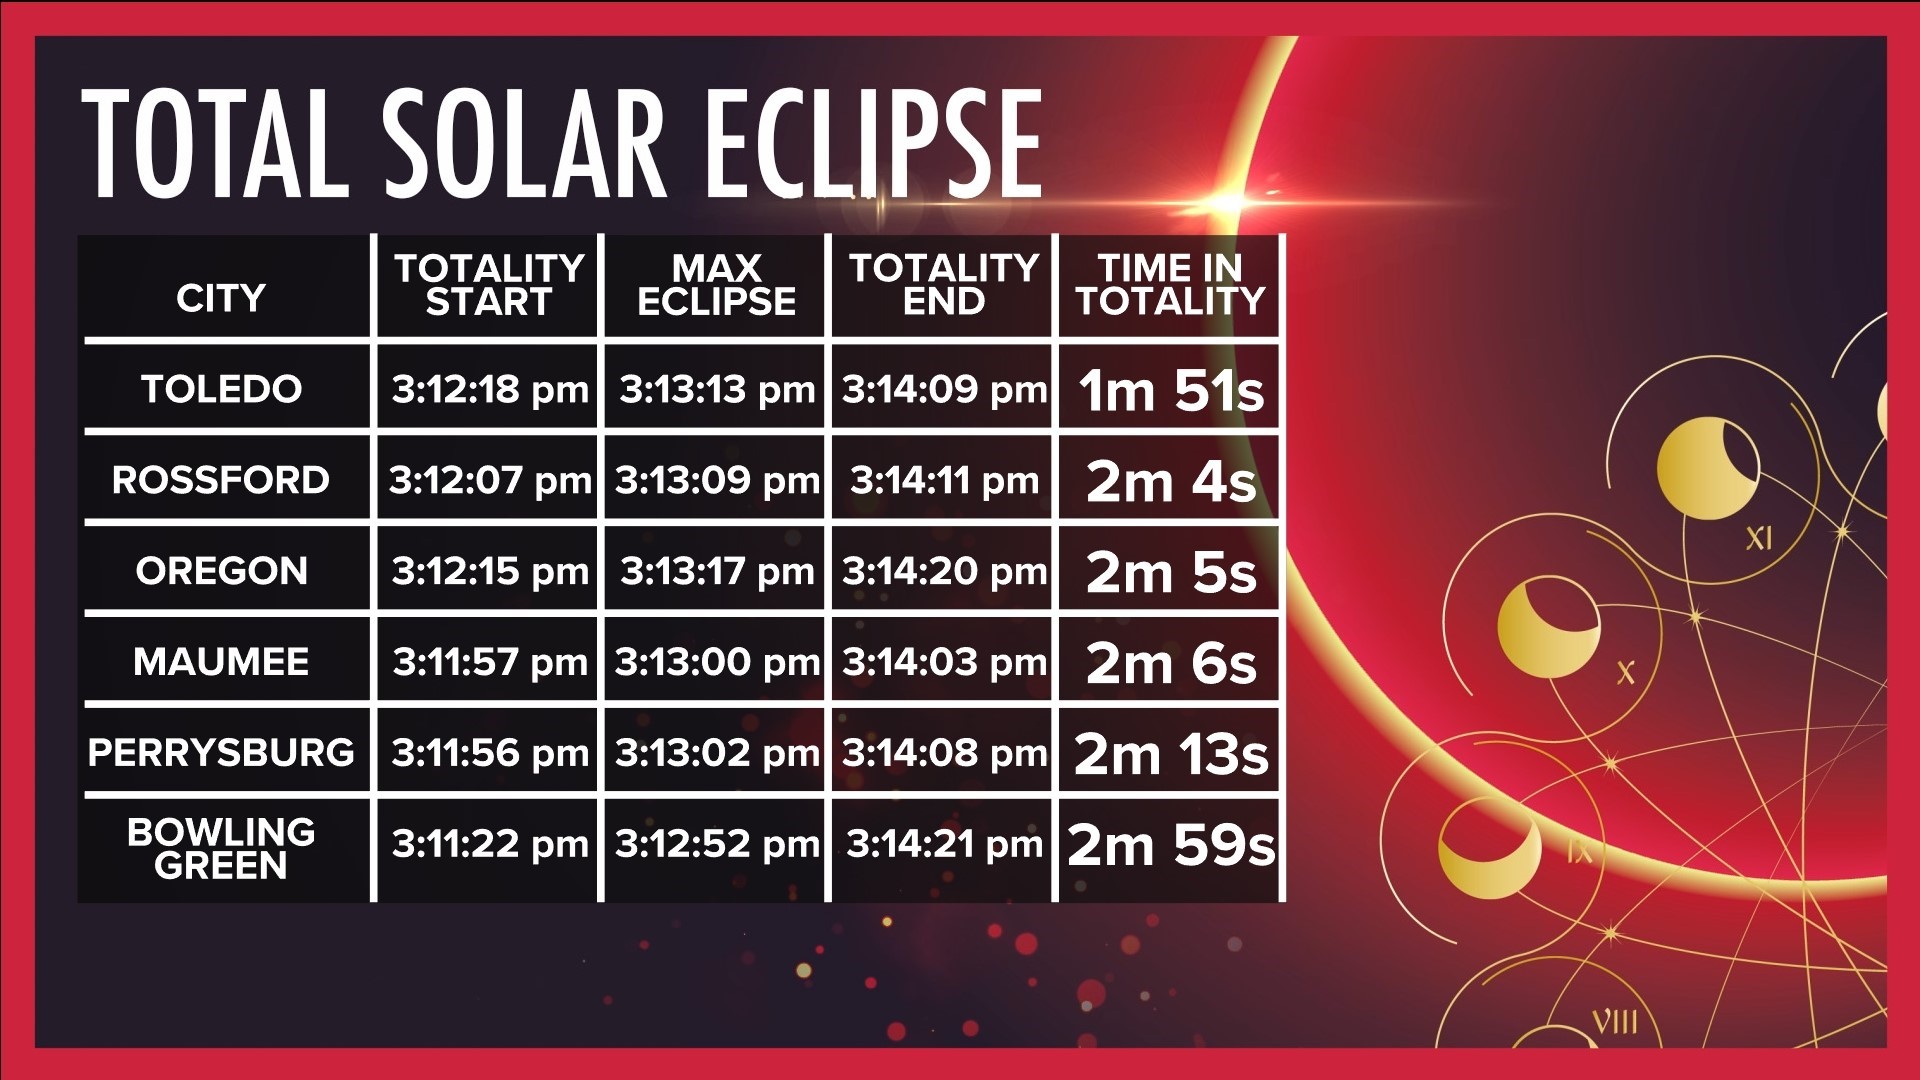 Total solar eclipse 2024 guide for Toledo and northwest Ohio